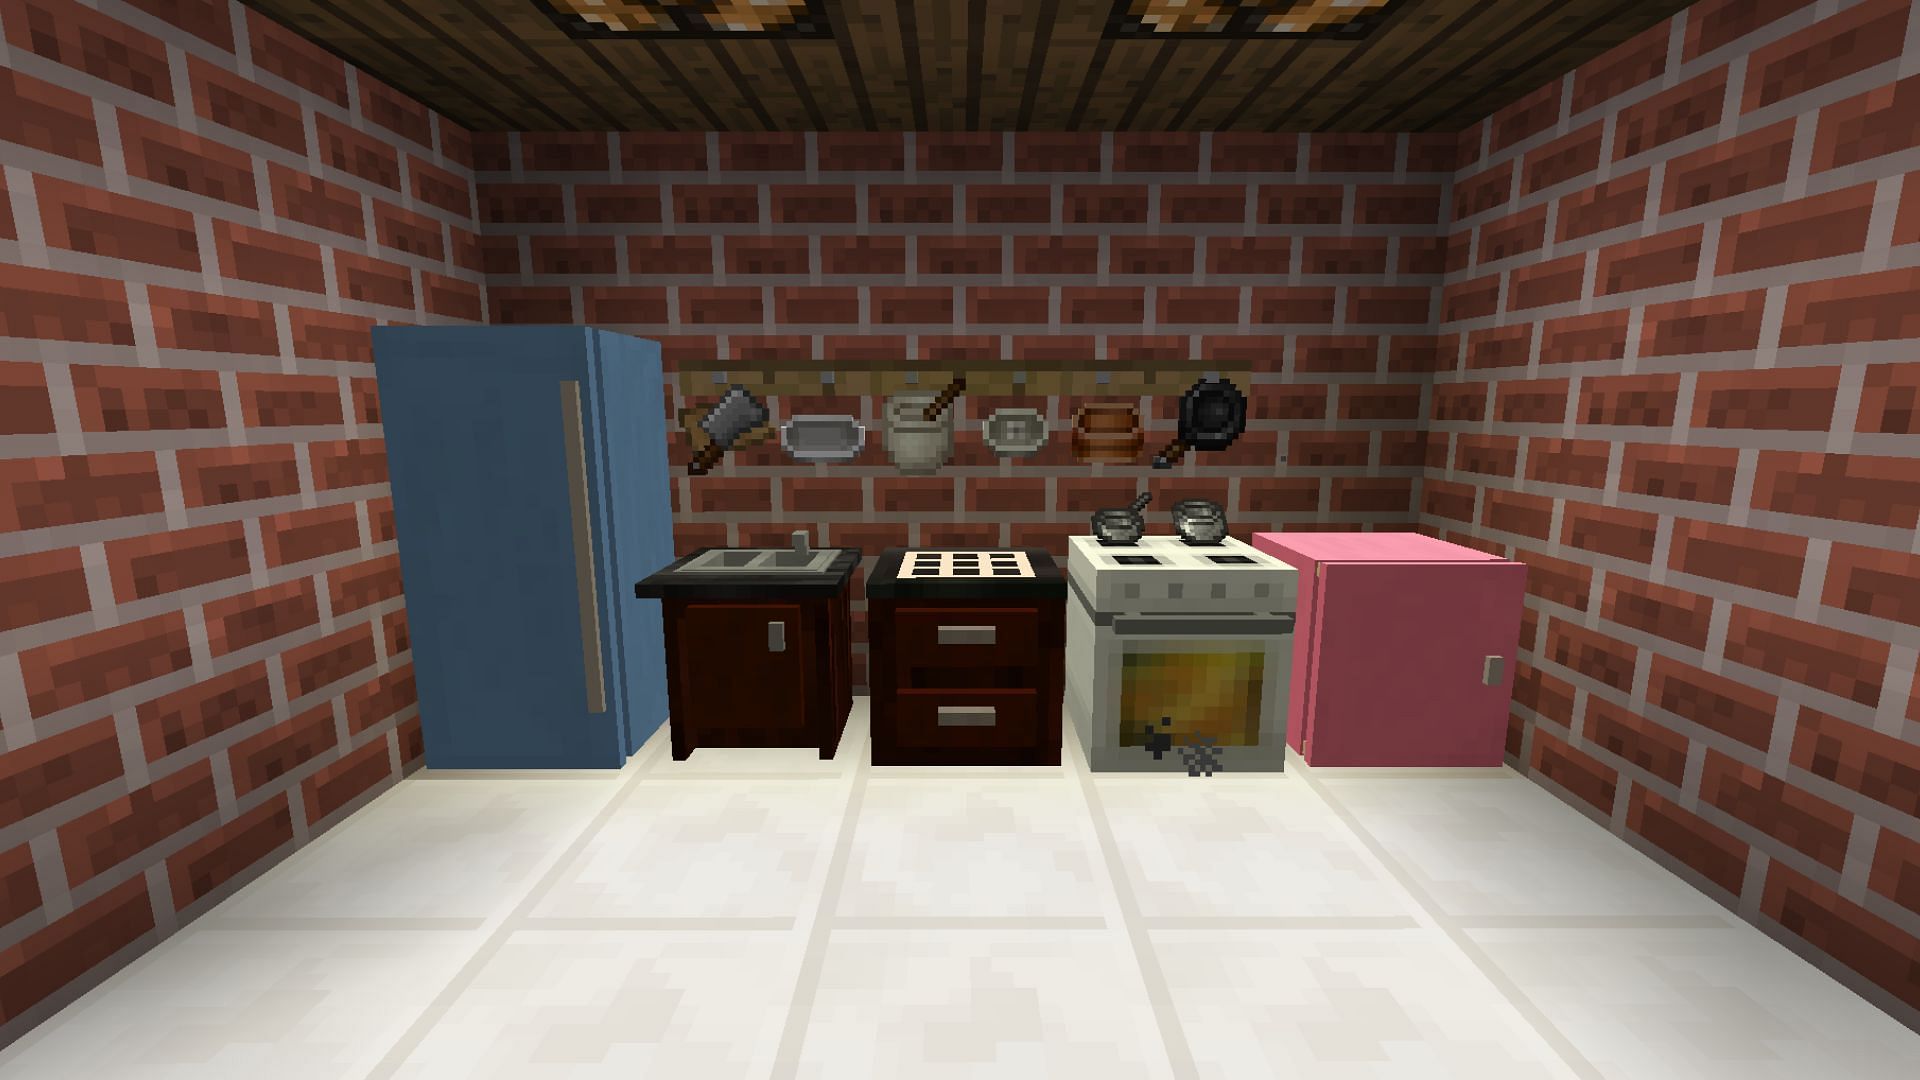 Fundy's terrible cooking Minecraft Mod